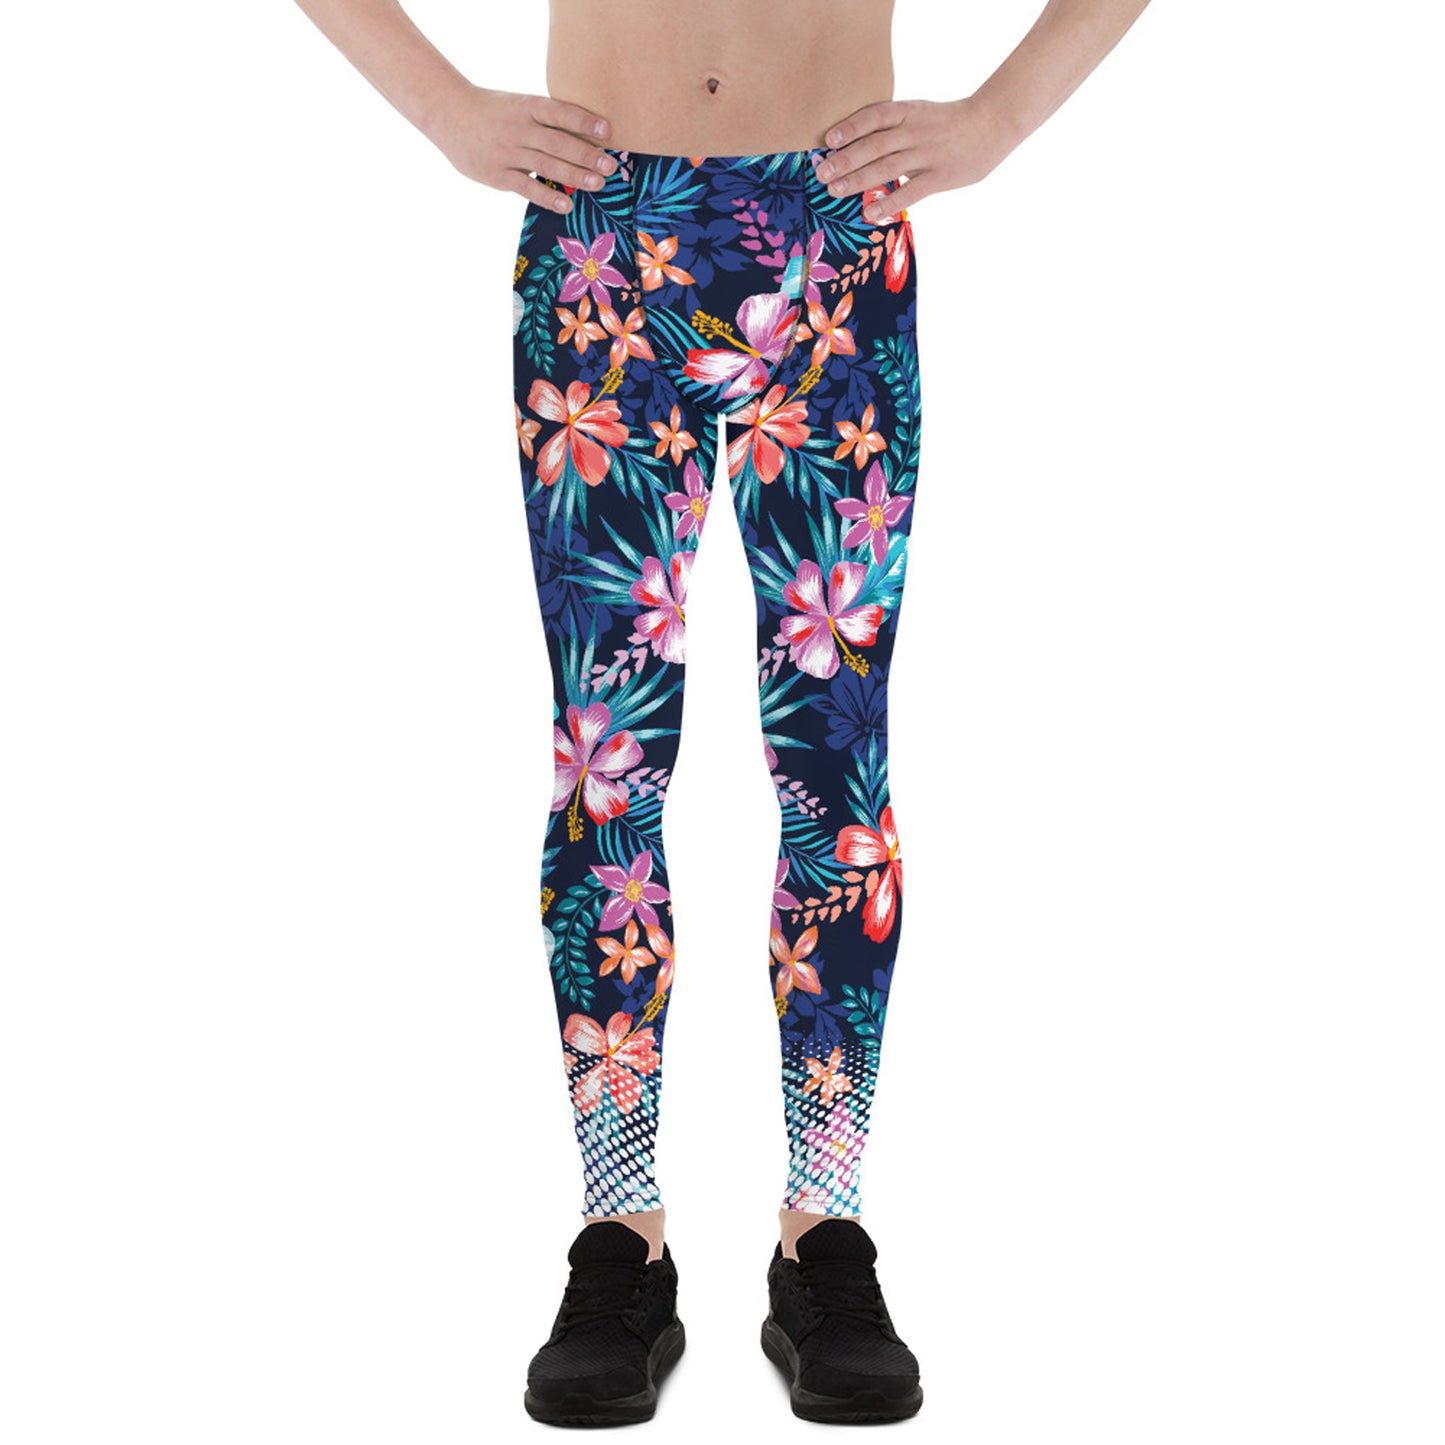 Hawaii Surf Leggings for Men with Fade White